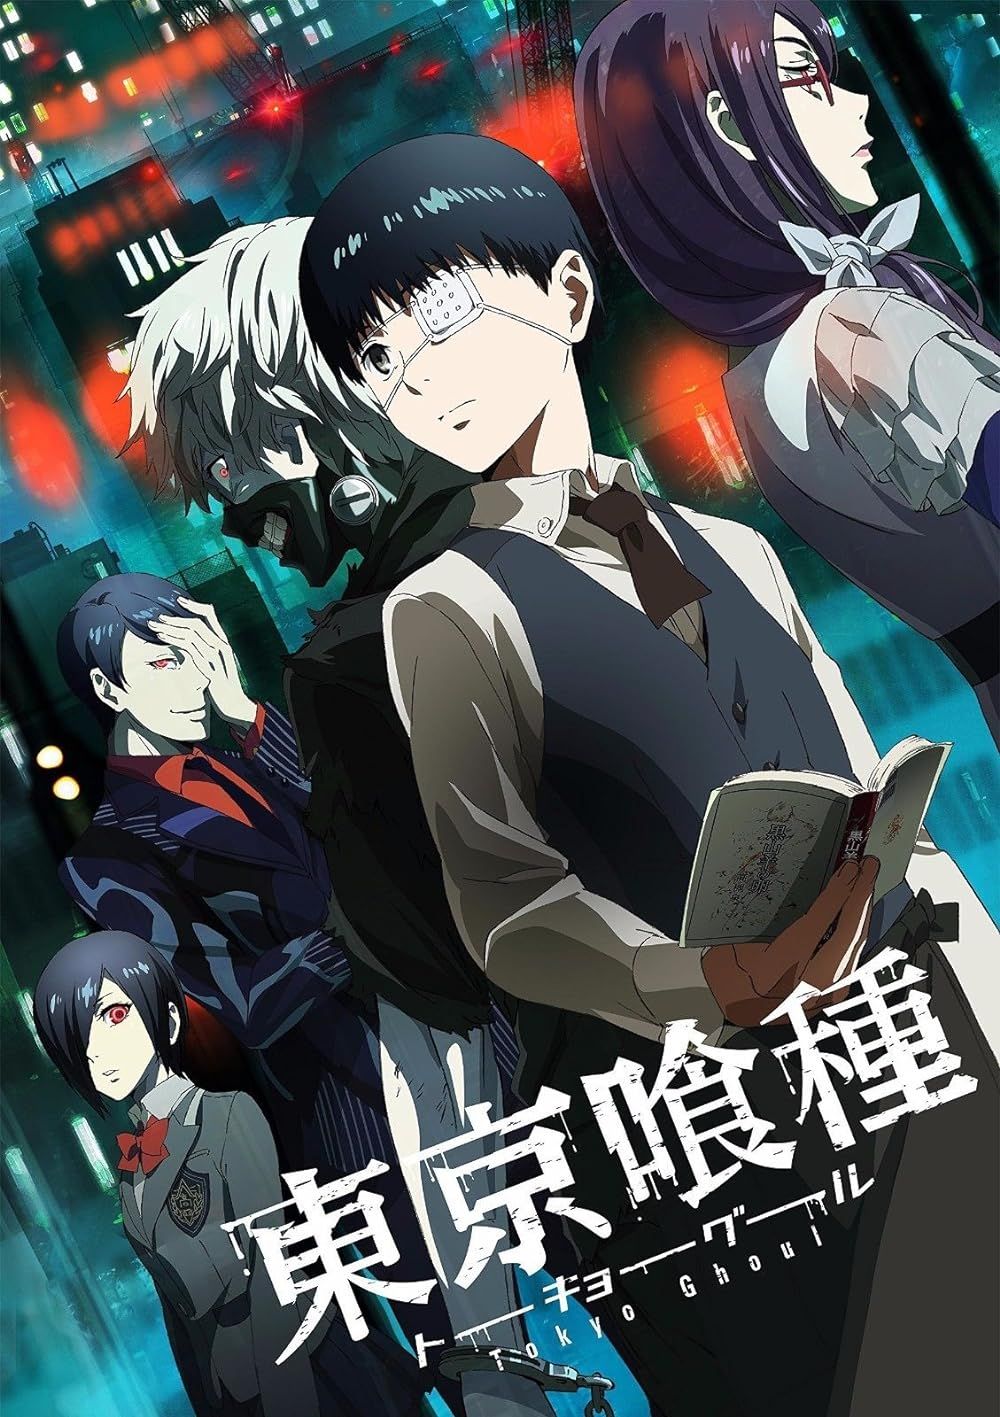 The Cast on the Tokyo Ghoul Poster